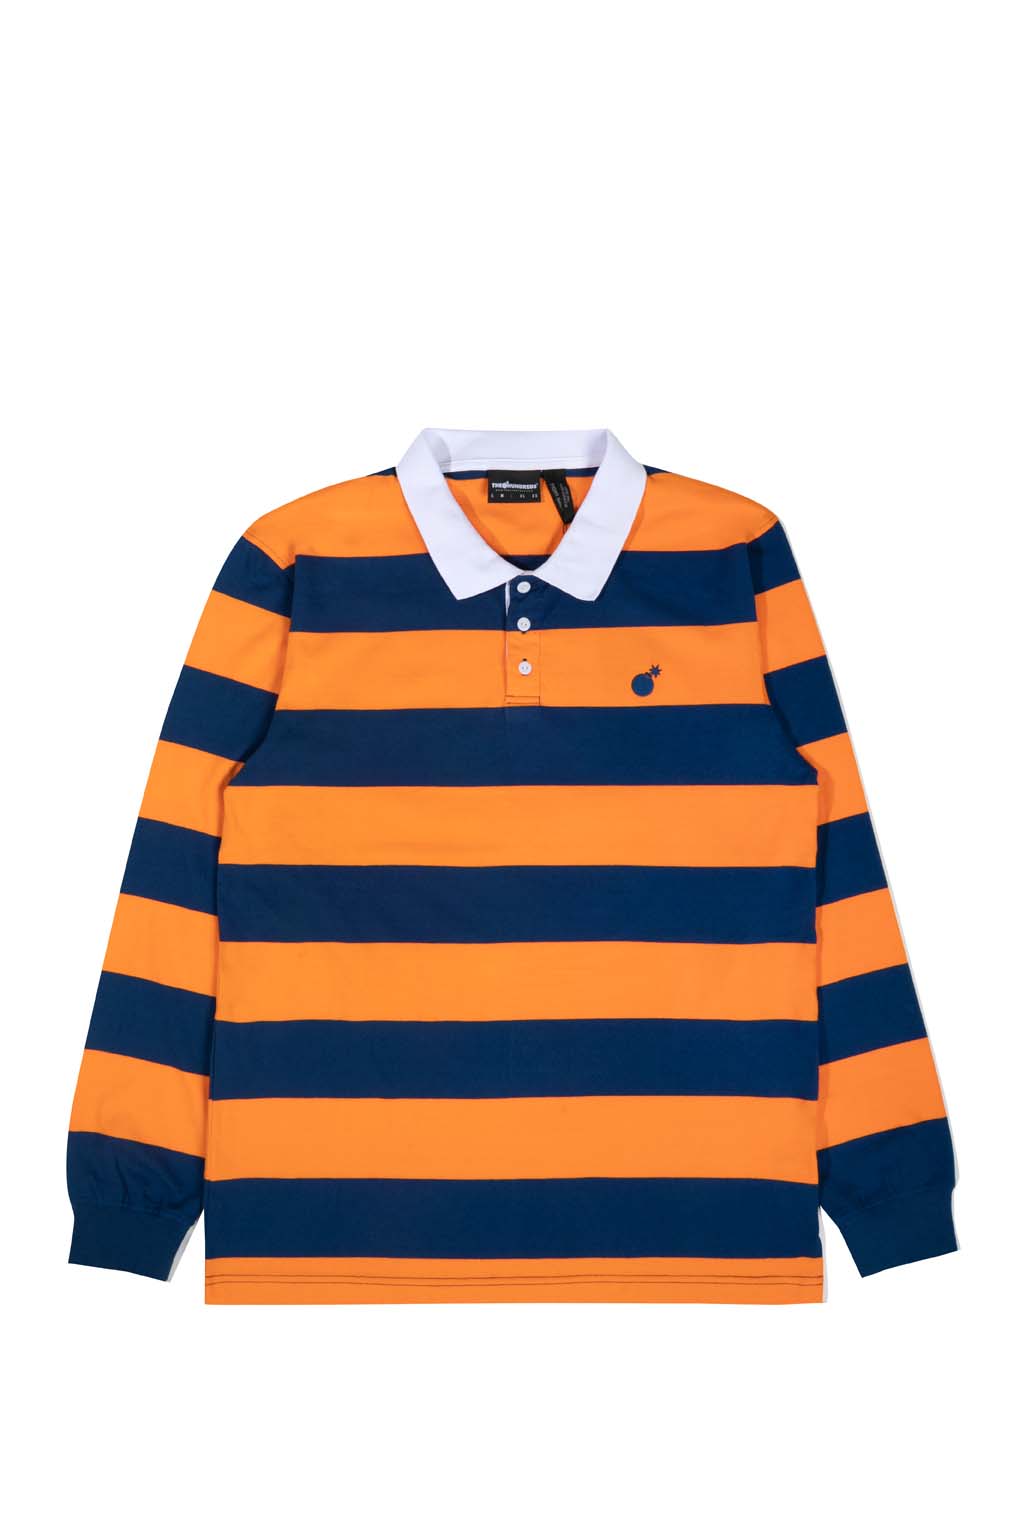 Image of Pacific L/S Rugby